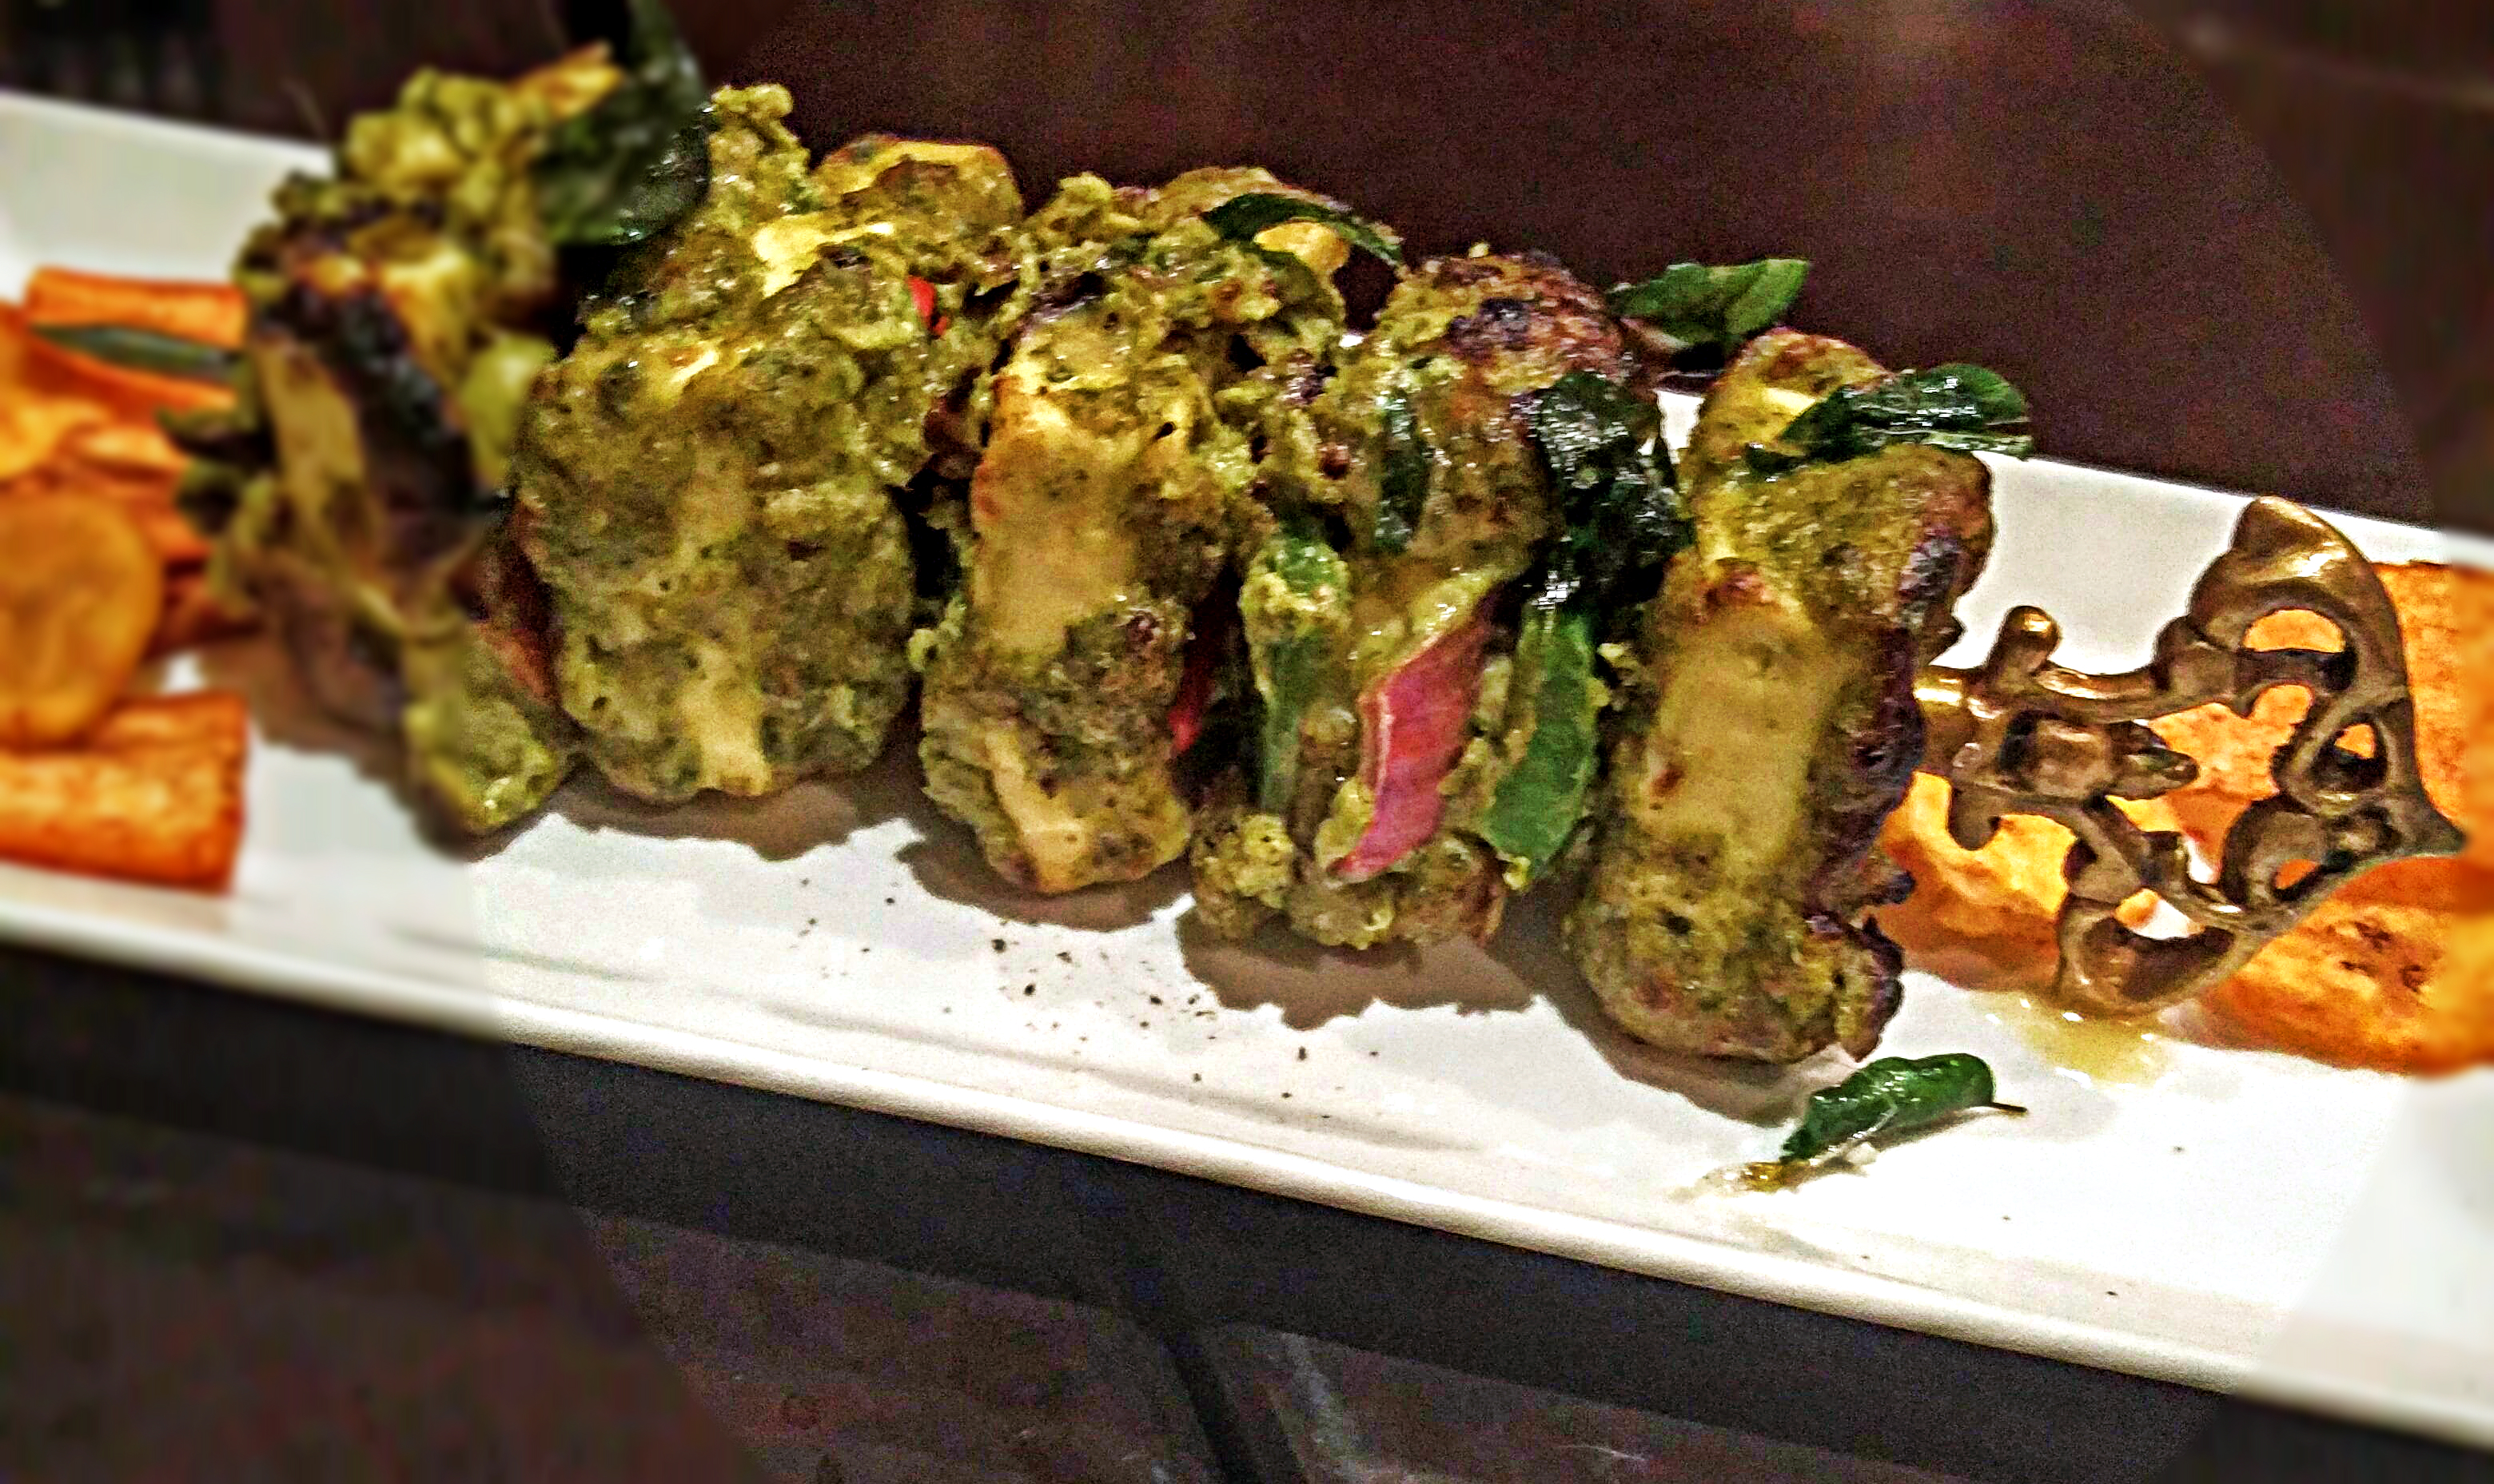 Karuveppilai Paneer Tikka - These are cottage cheese kebabs with a southern twist. The curry leaves loads in nostalgia of southern Indian chutney.